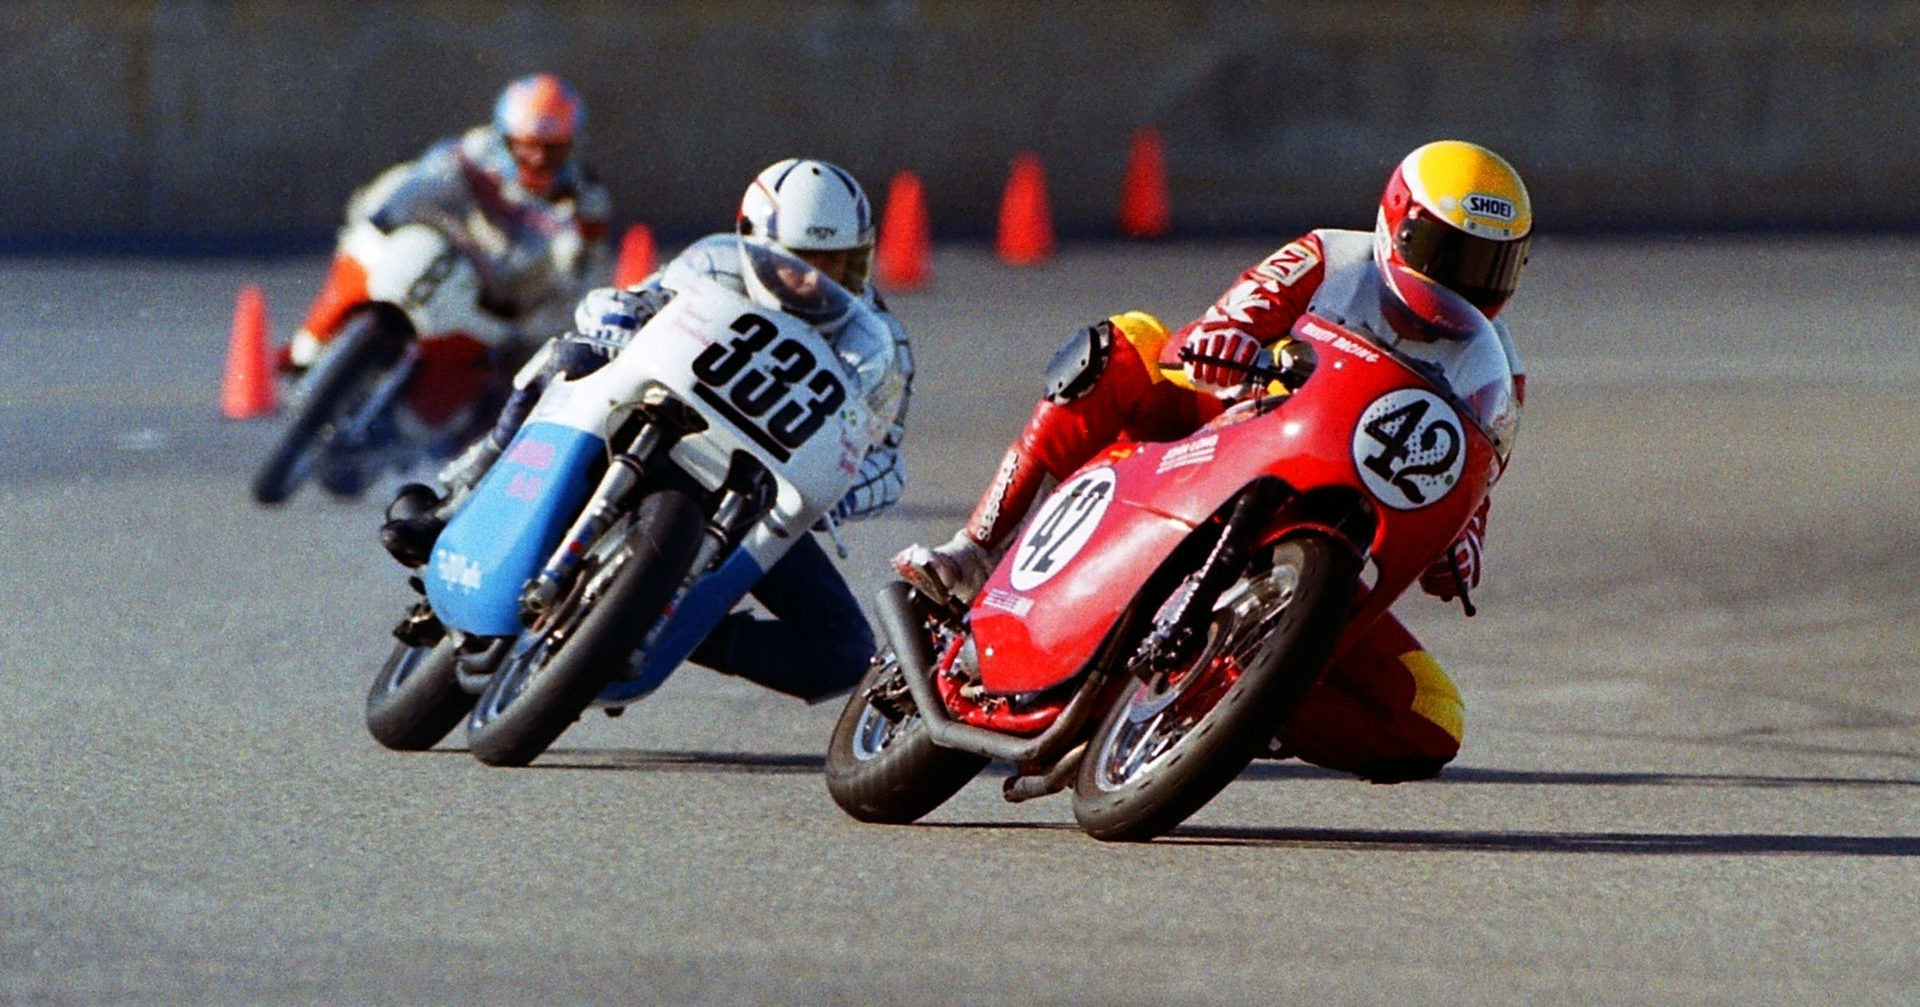 John Long (42) and Richard Moore (333) in action at Daytona International Speedway in 1993. Photo by etechphoto.com, courtesy AHRMA.